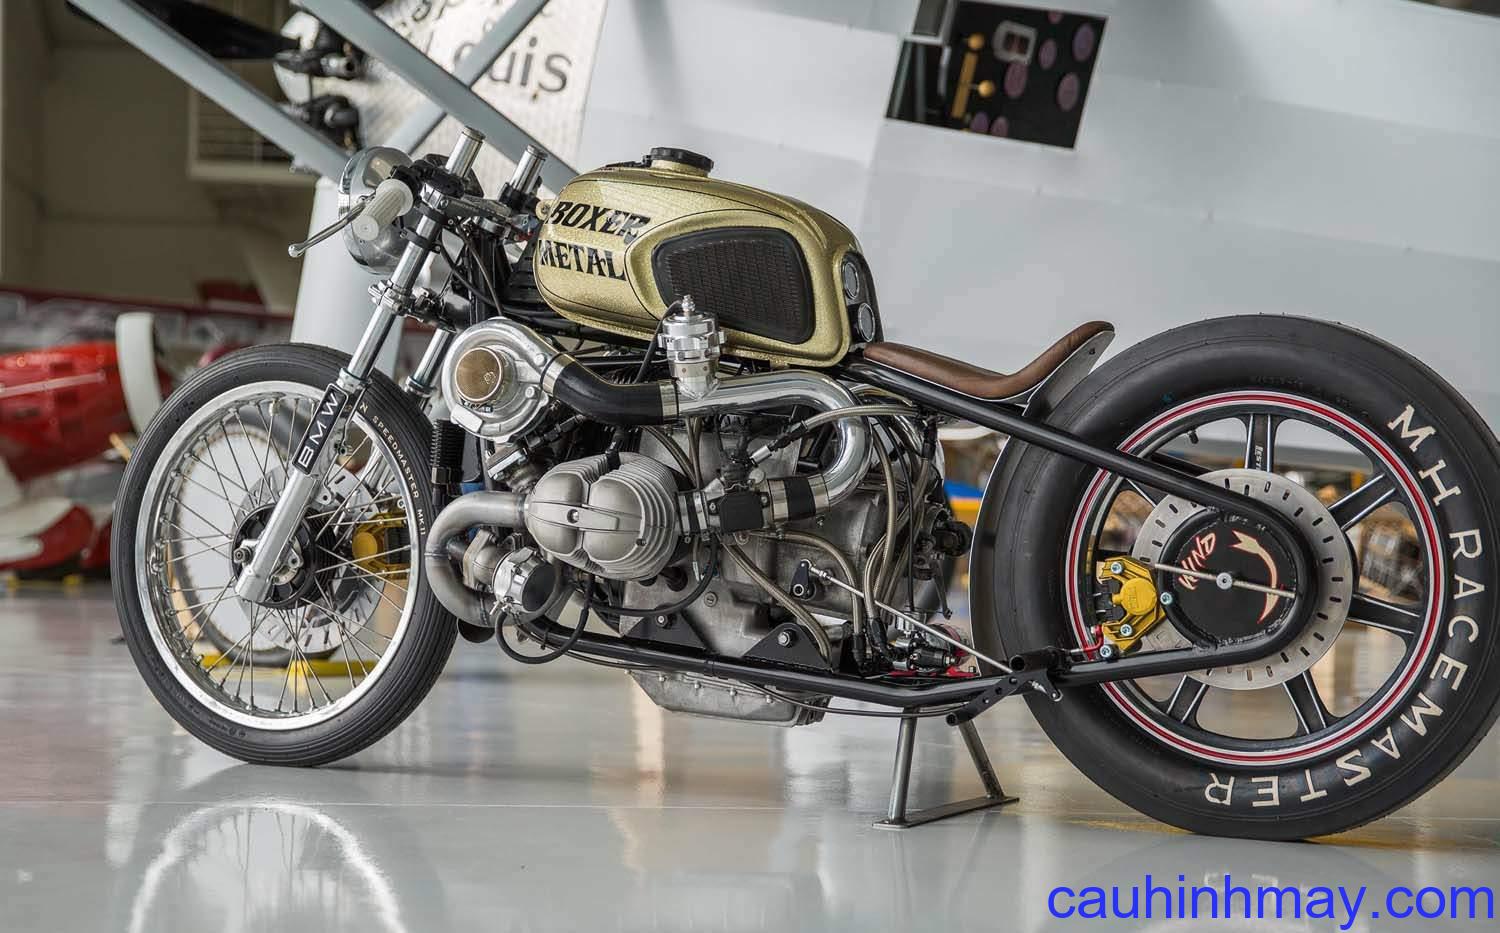 BMW R100 TWIN TURBO BY BOXER METAL  - cauhinhmay.com